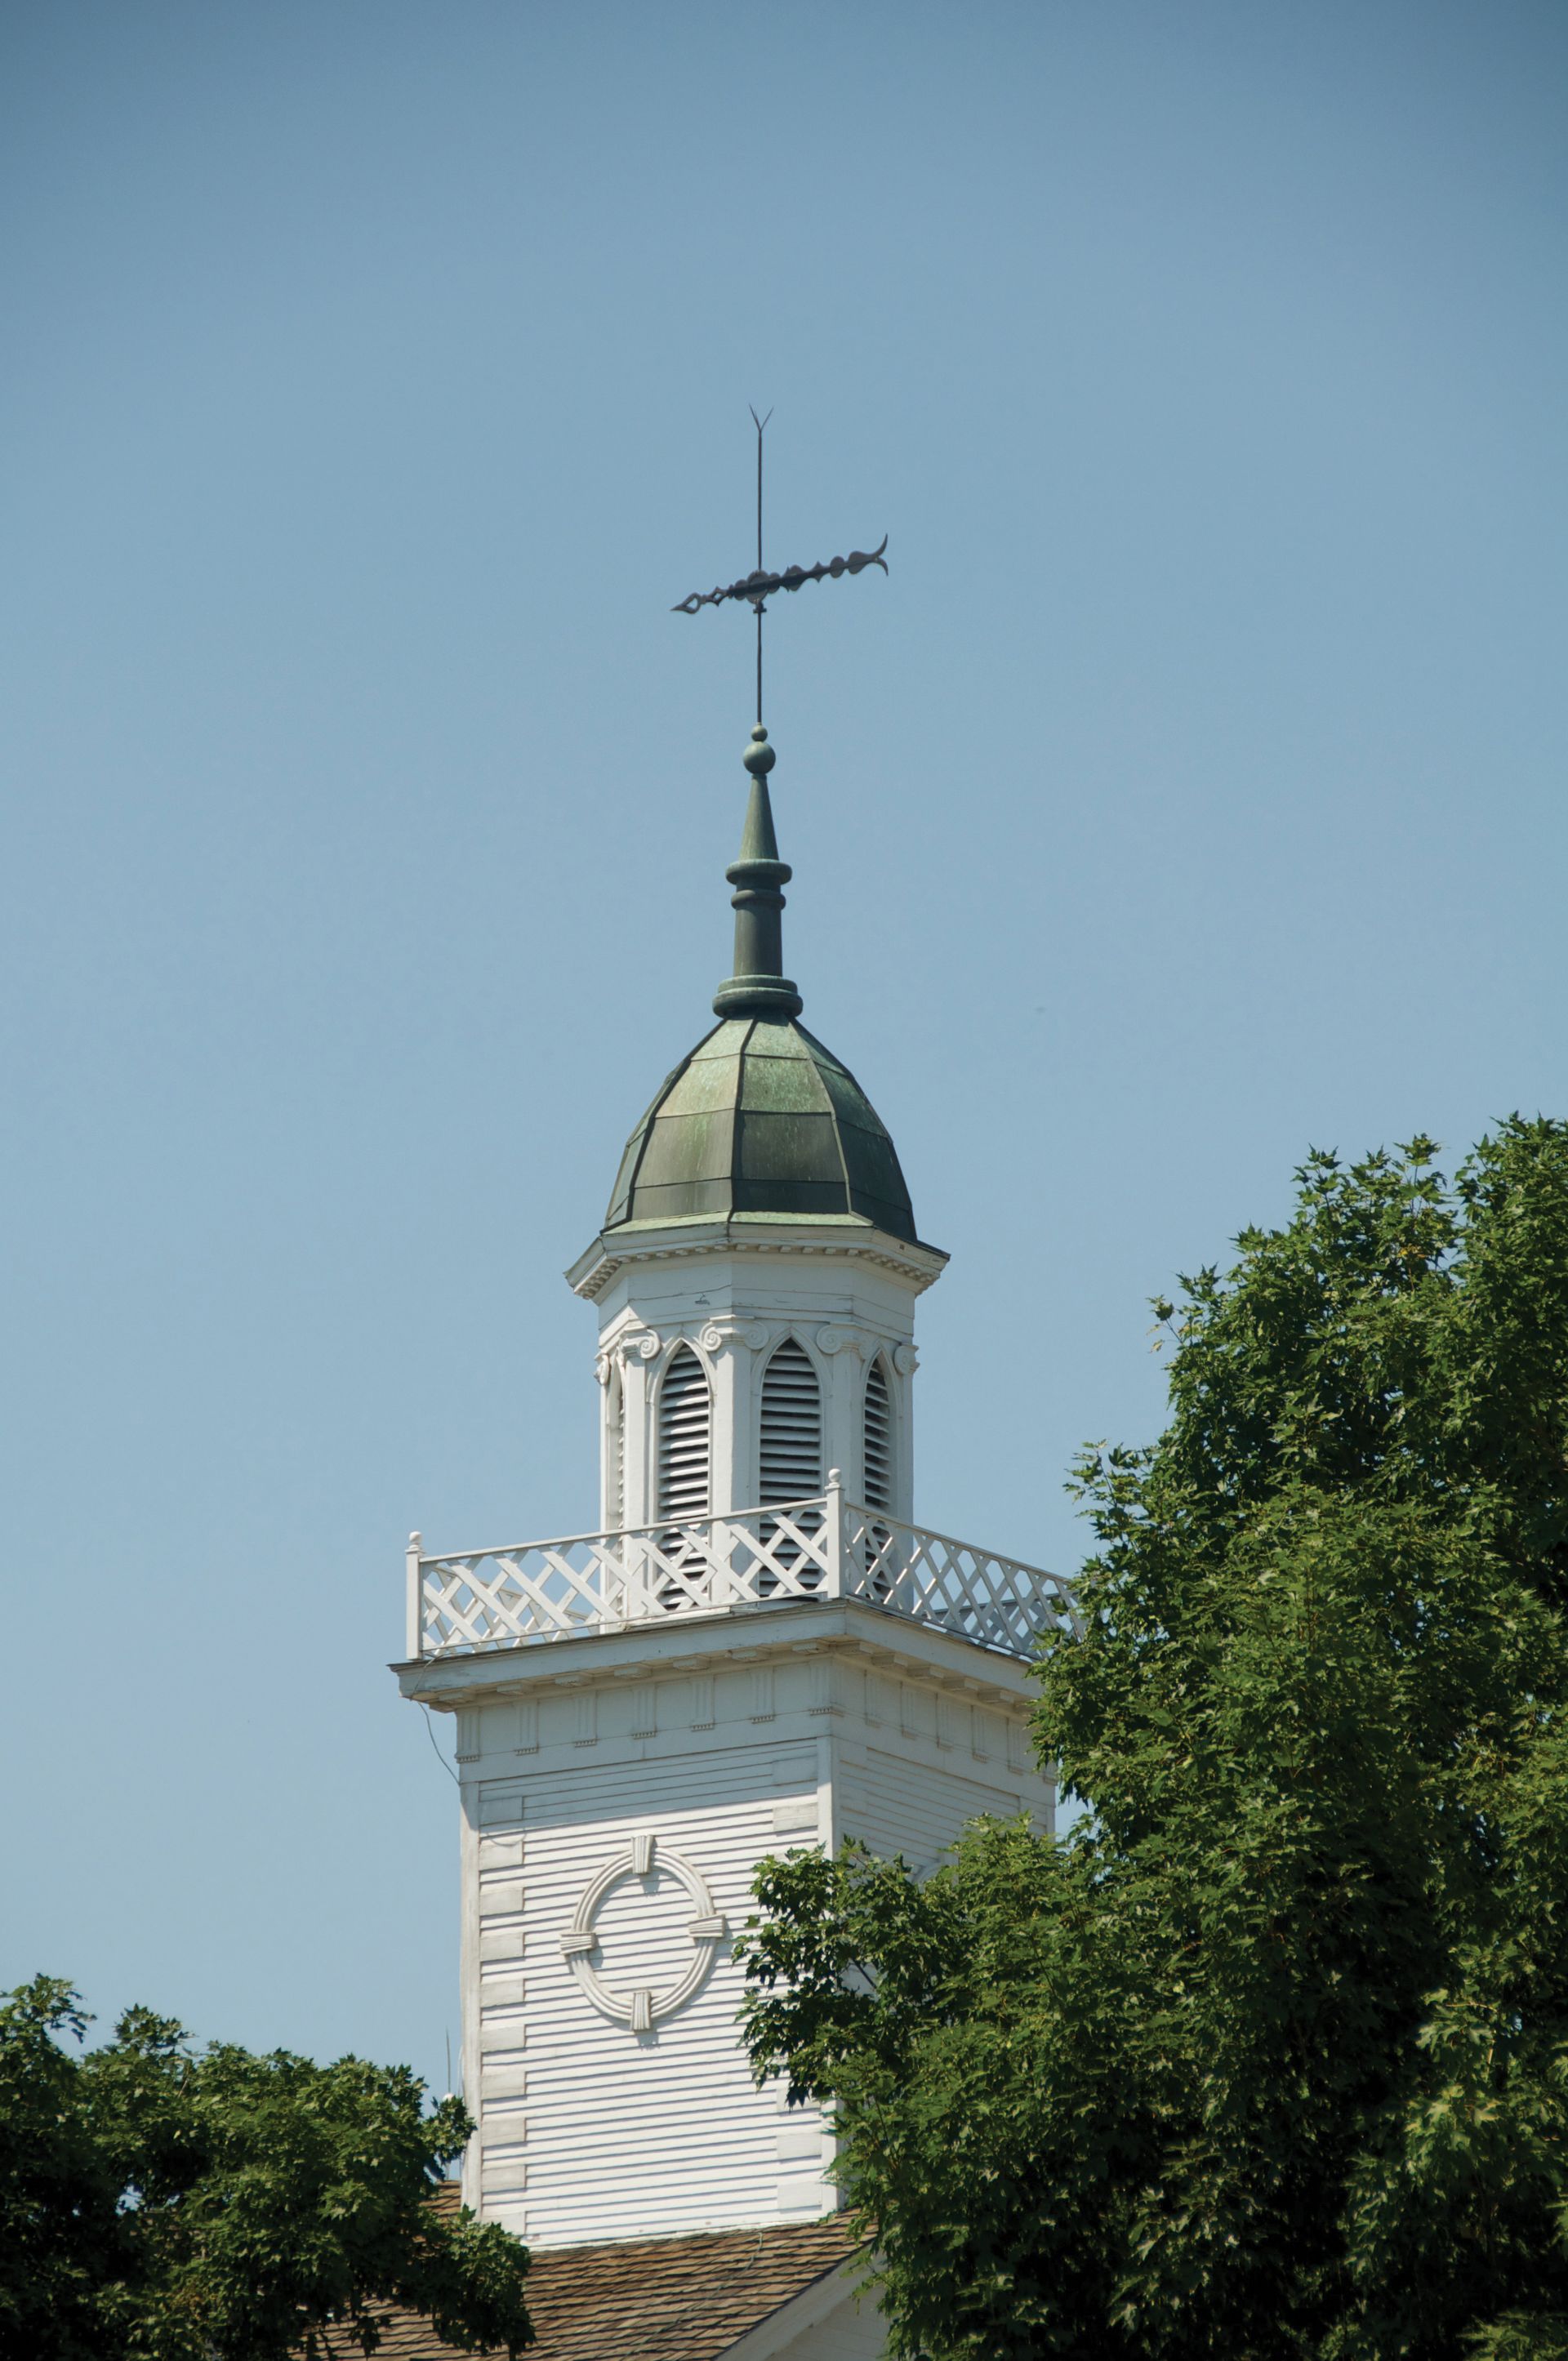 The Kirtland Temple spire, including scenery.